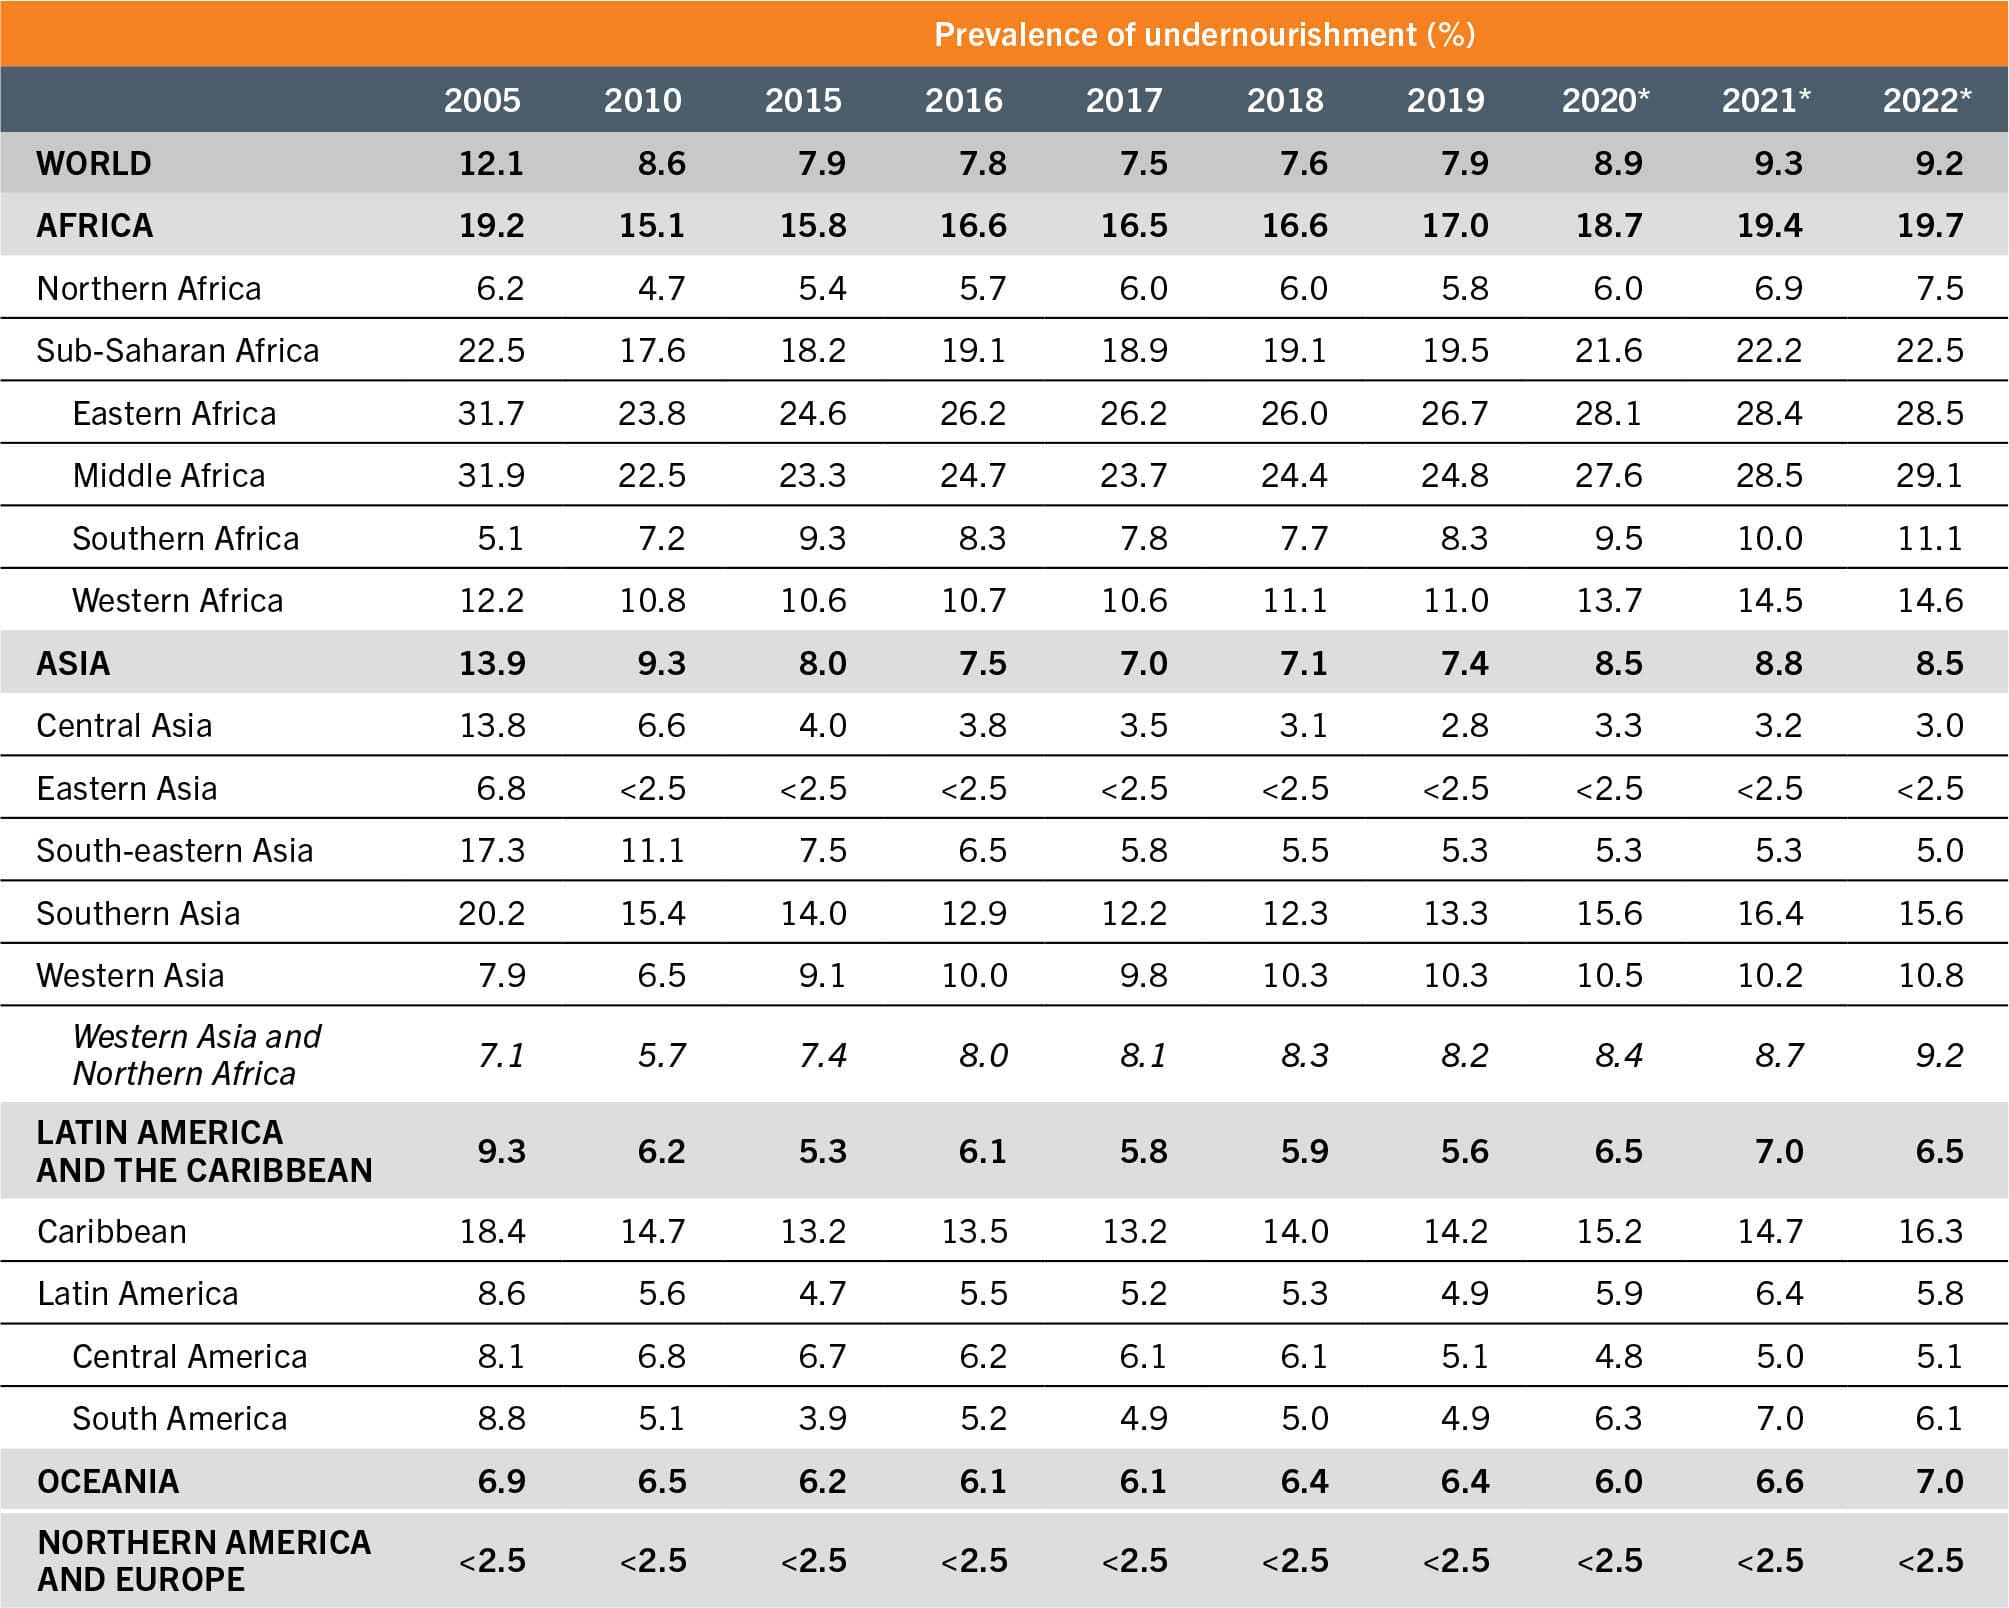 A table lists the prevalence of undernourishment at the global, regional and subregional levels.